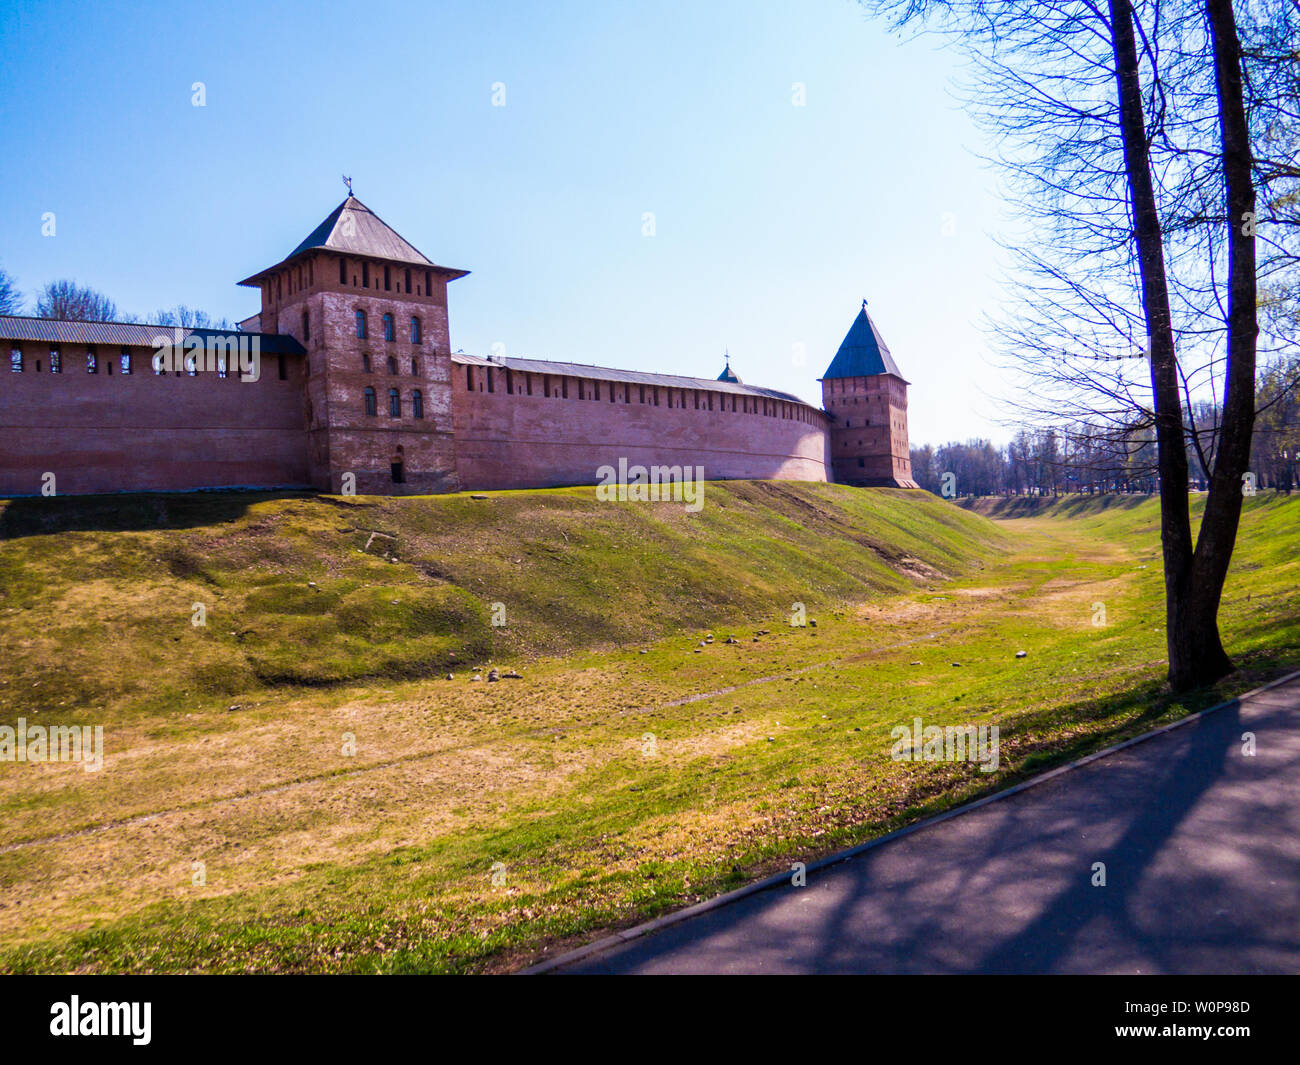 View of the Walls of the Kremlin in Veliky Novgorod, Russia Stock Photo